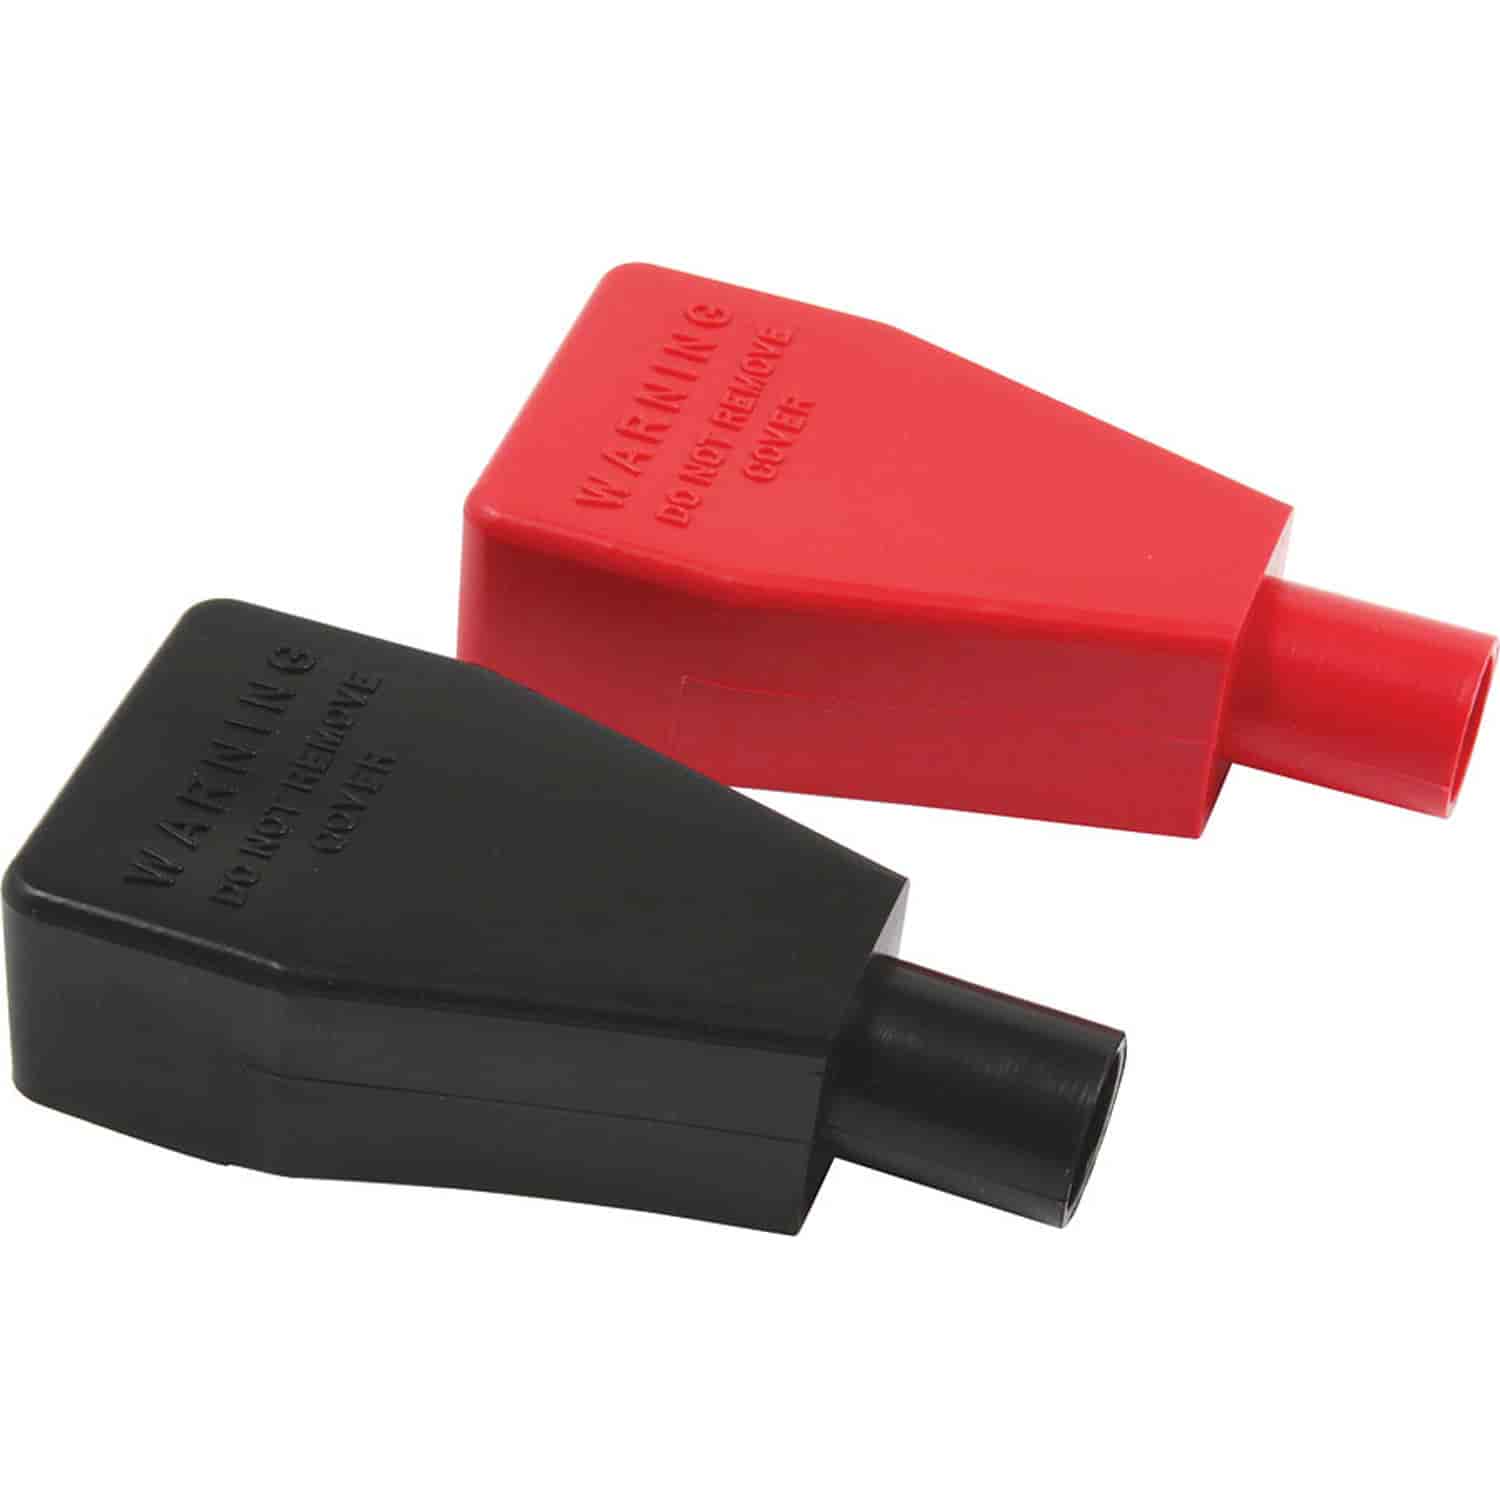 Battery Terminal Insulated Covers 2-Pack